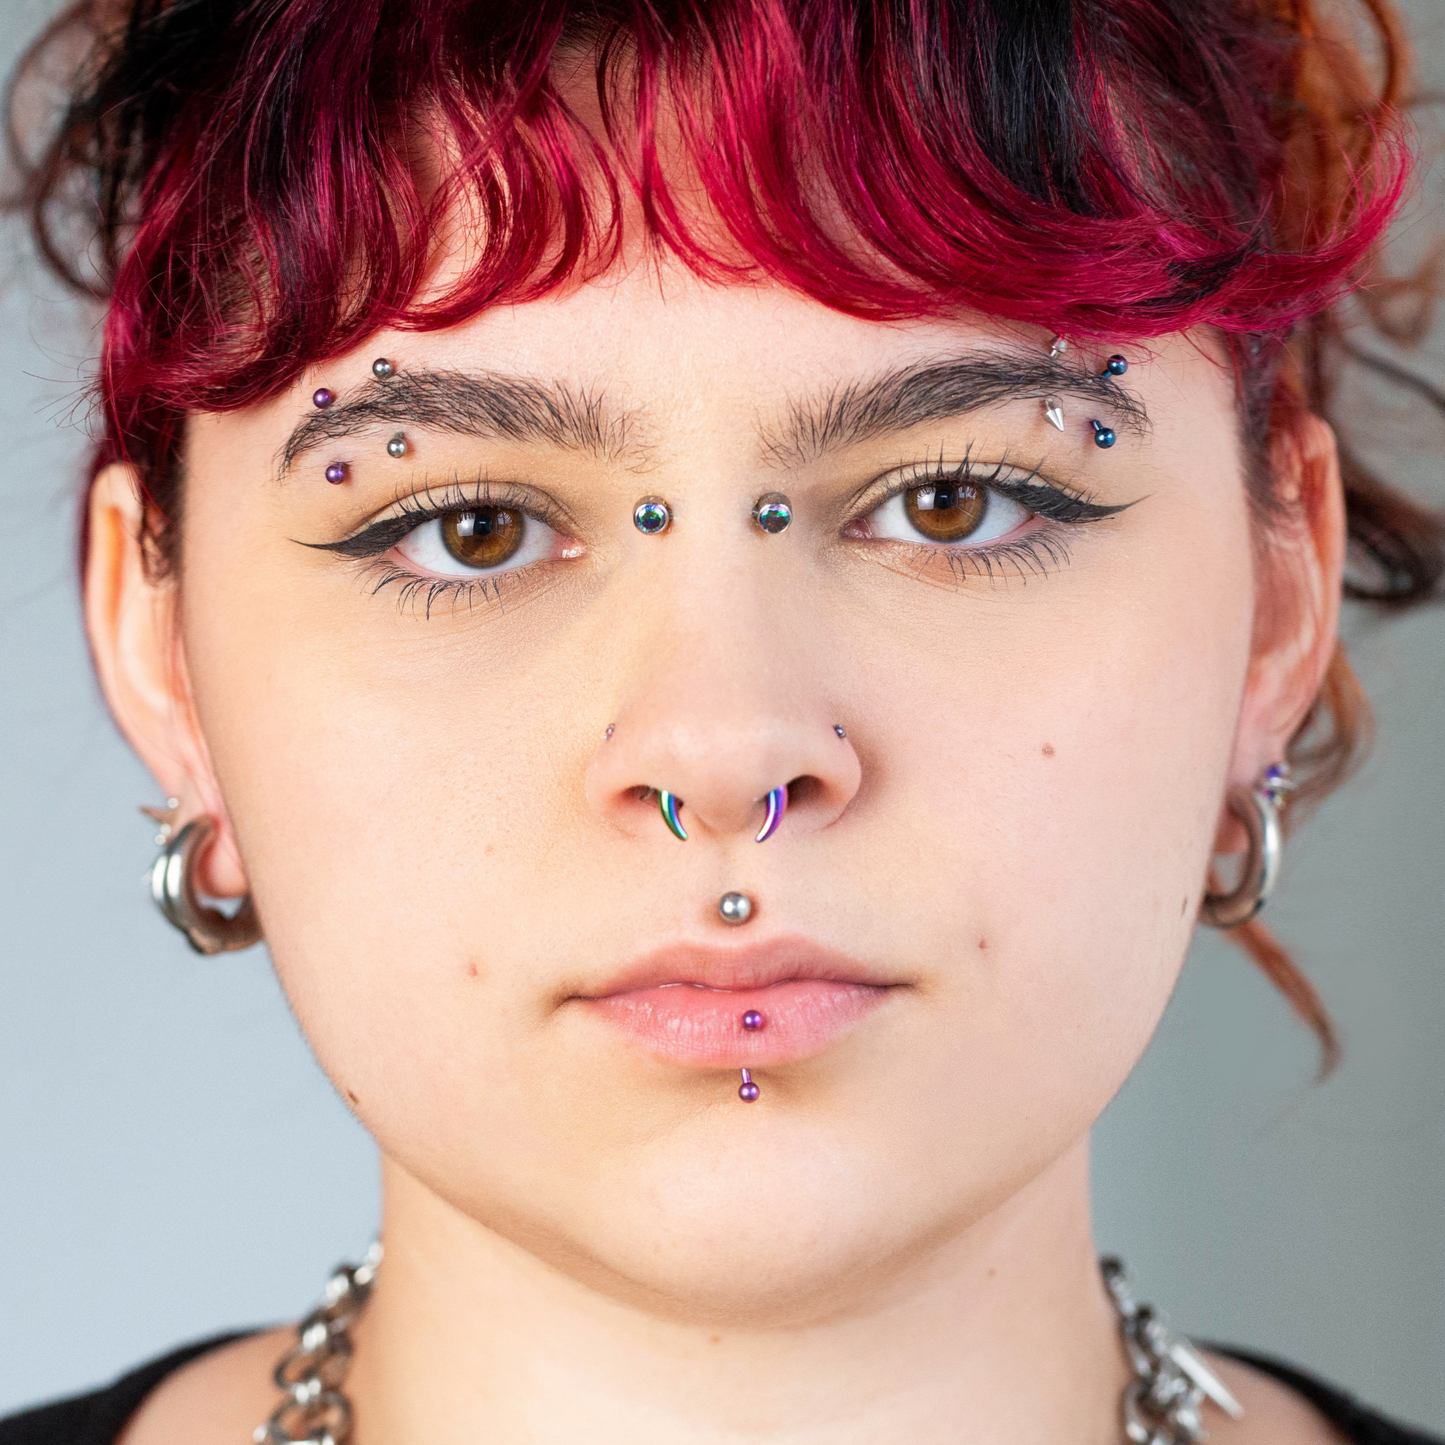 Septum Pincher Ring with 2 Black O-Rings - Stainless Steel